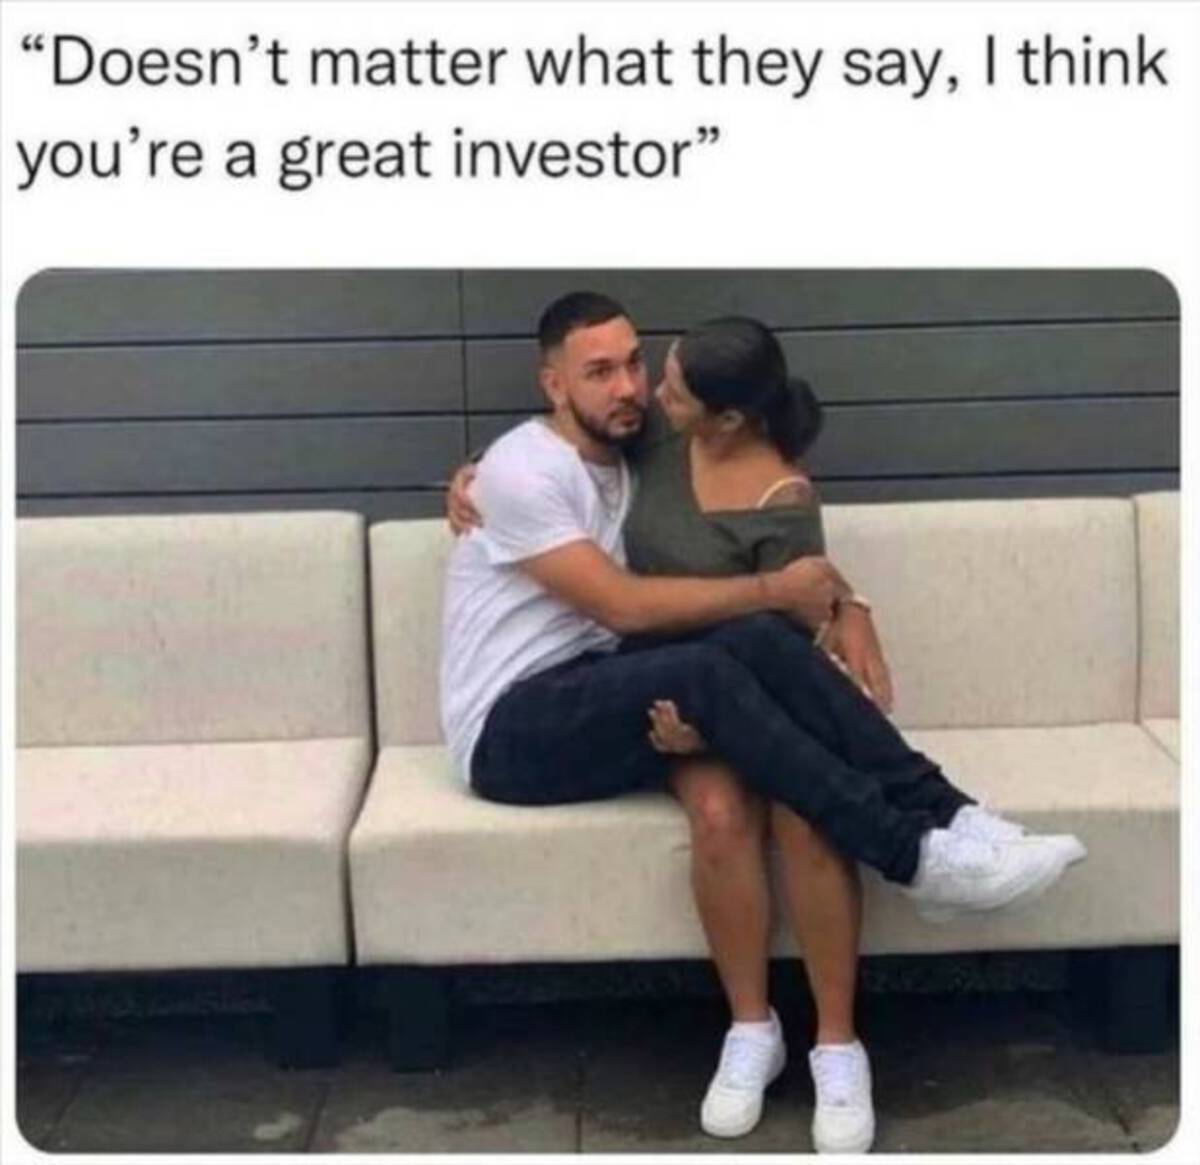 love - "Doesn't matter what they say, I think you're a great investor"